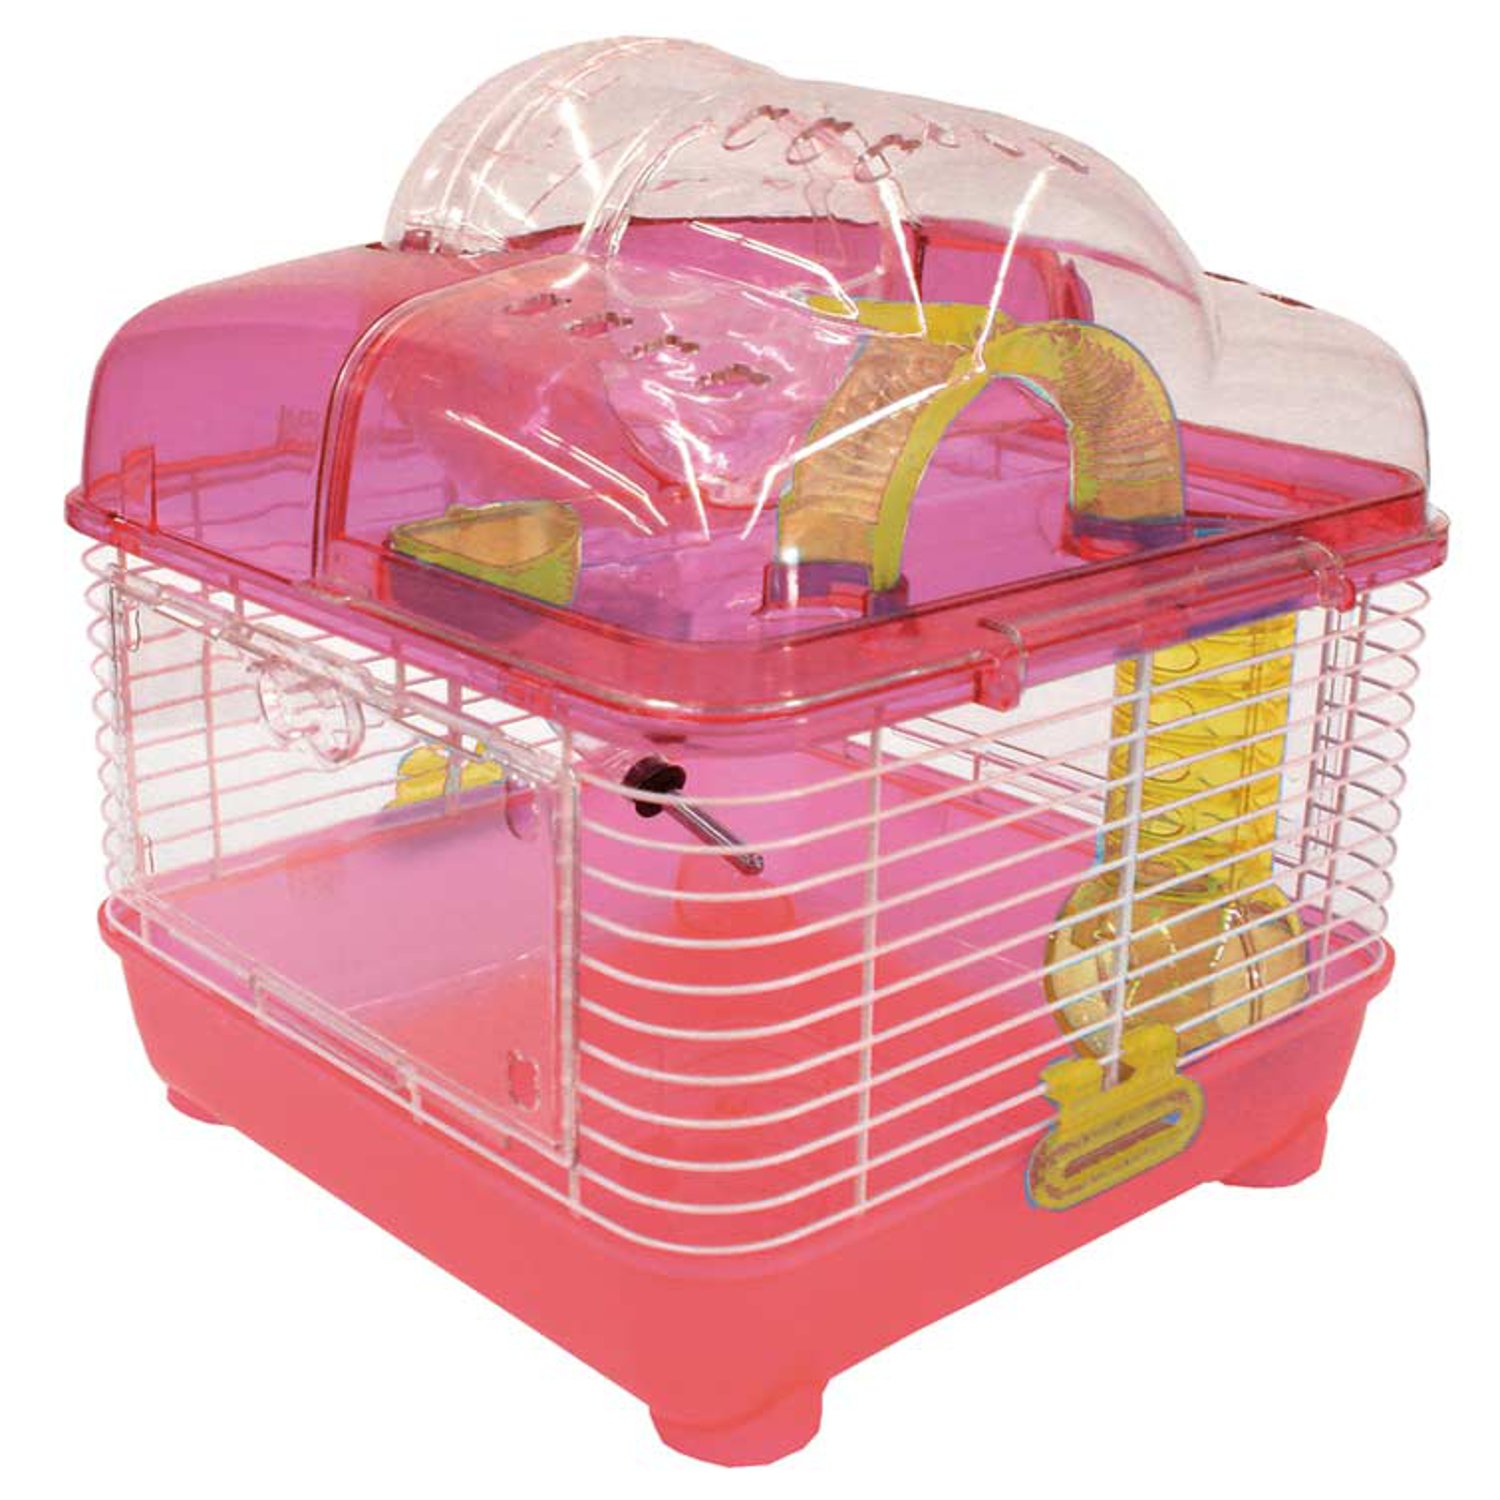 YML Pink Hamster Cage | Petco